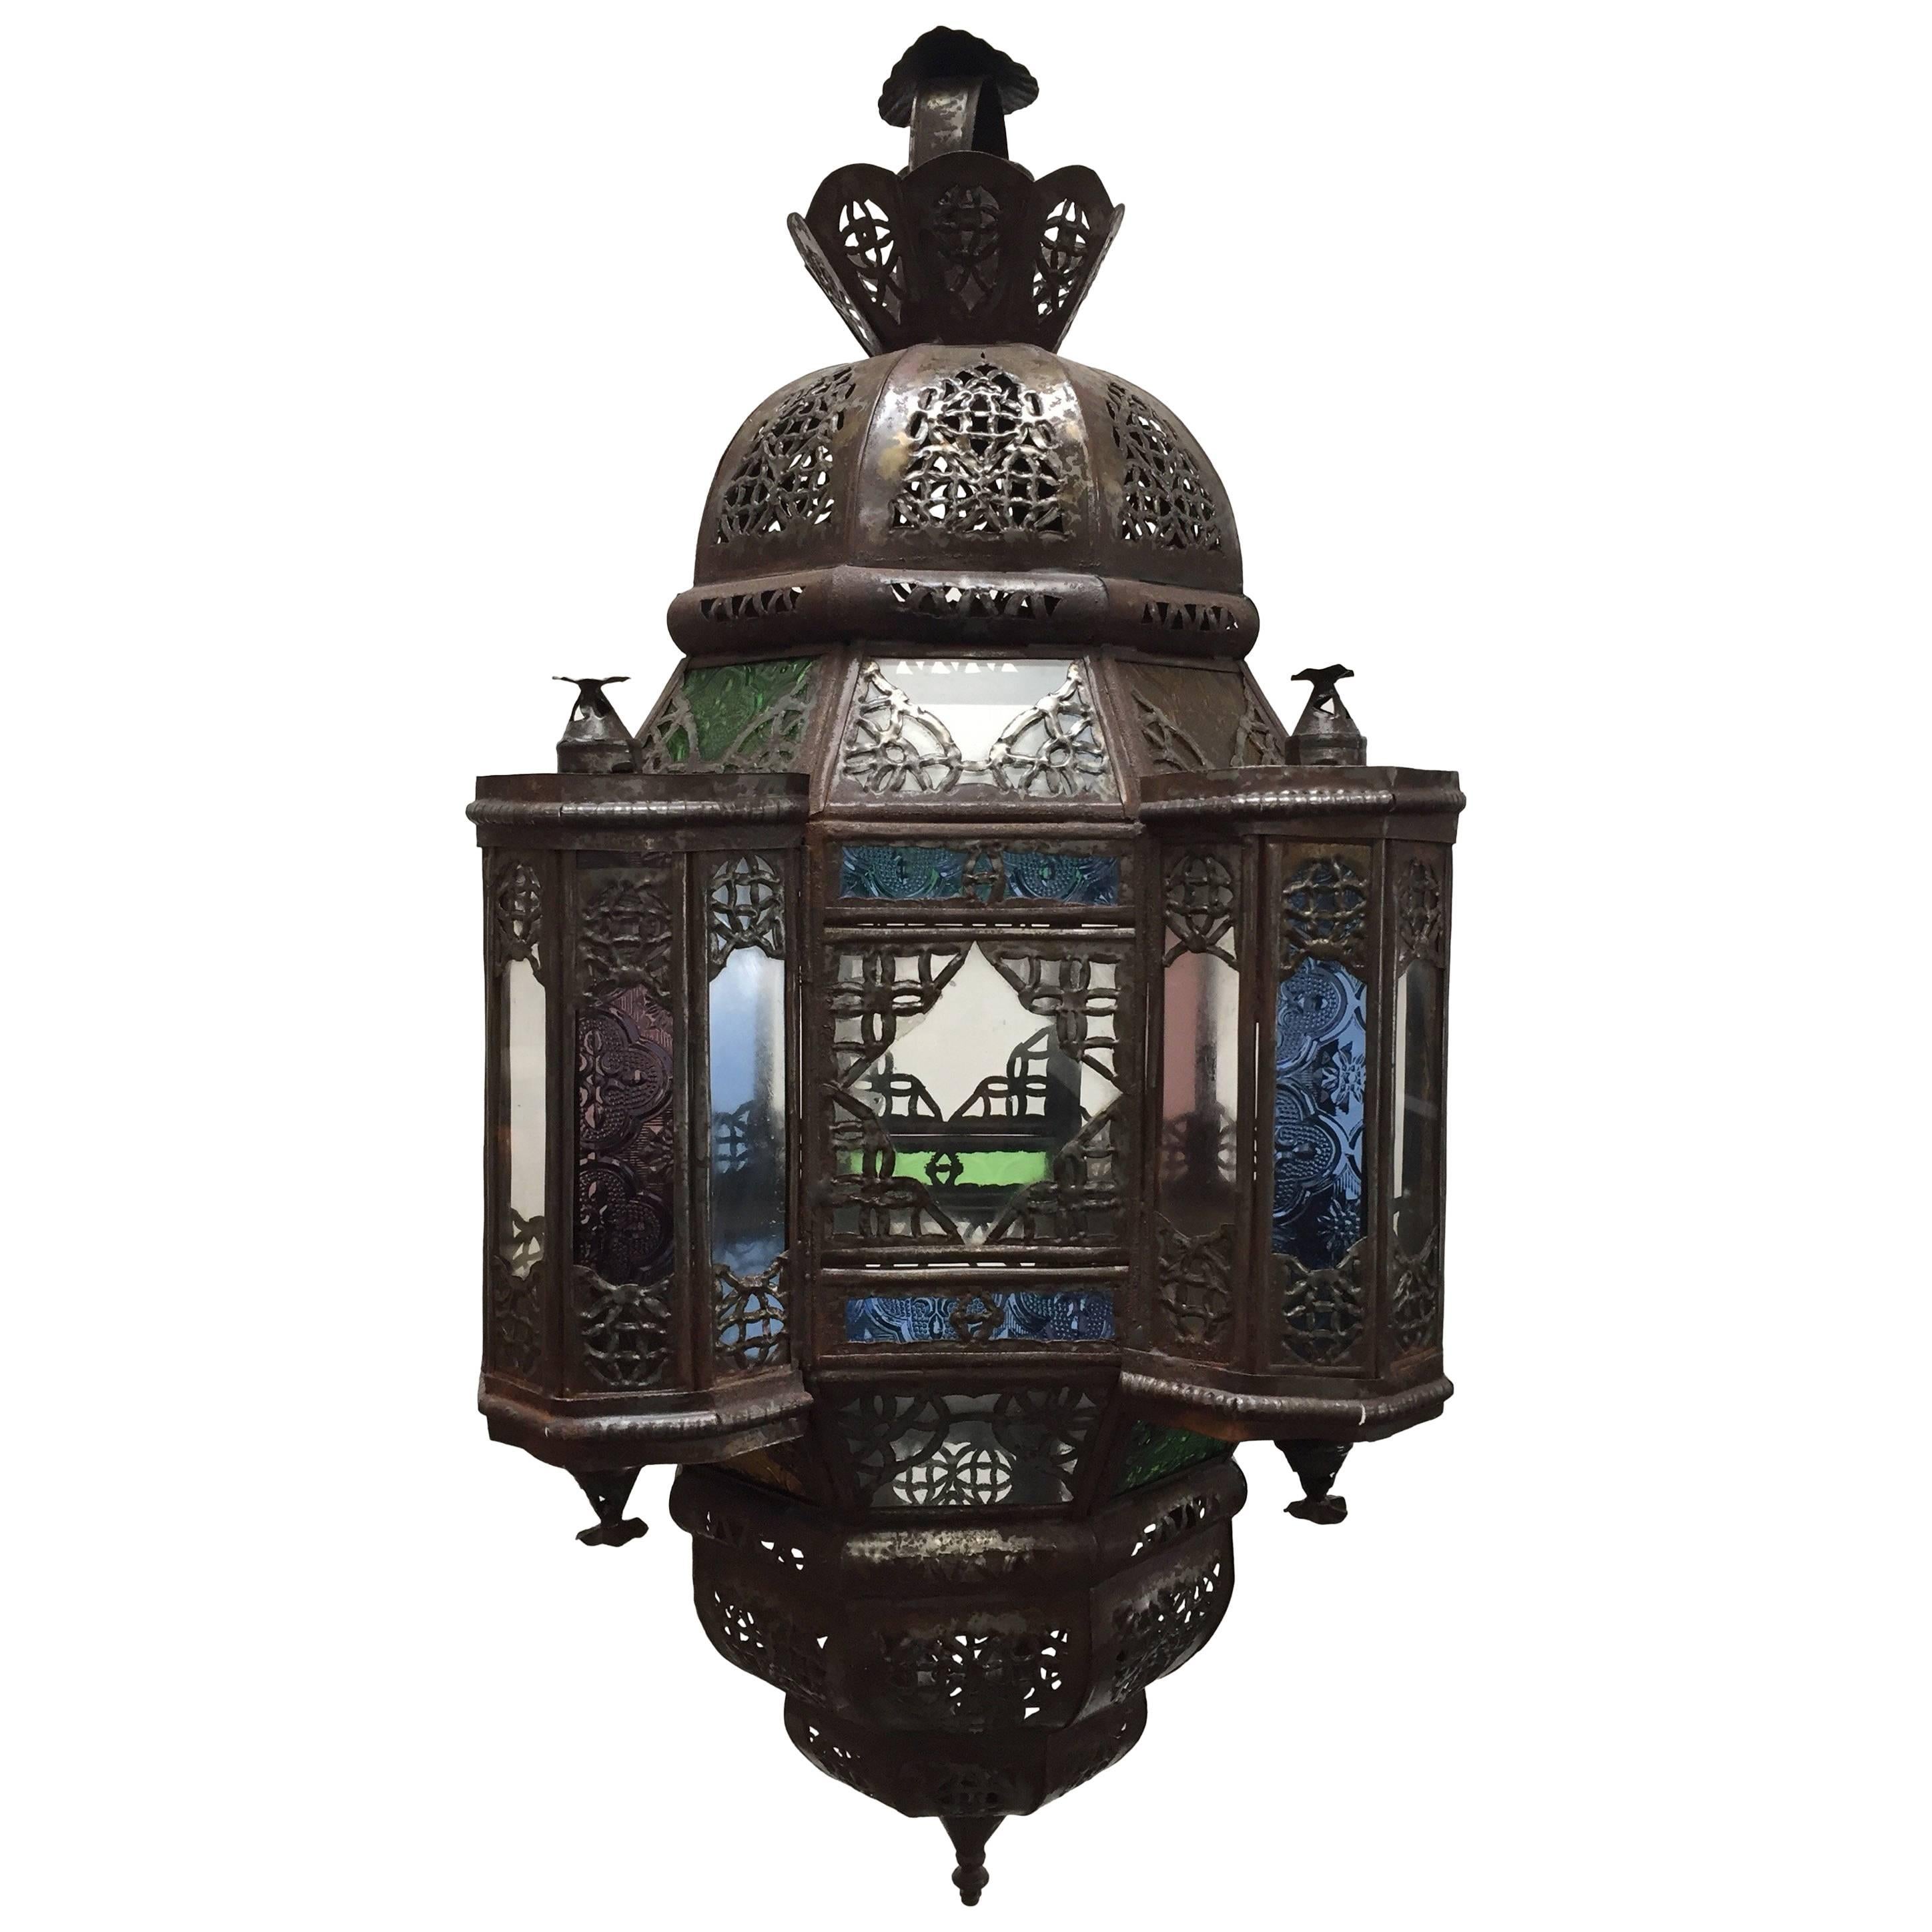 Pair of handcrafted Moroccan glass pendant with clear and colored glass, square shape with towers and a dome with metal filigree.
This multi-color Moroccan glass lantern with Moorish arches in metal filigree and colored glass in green, blue,